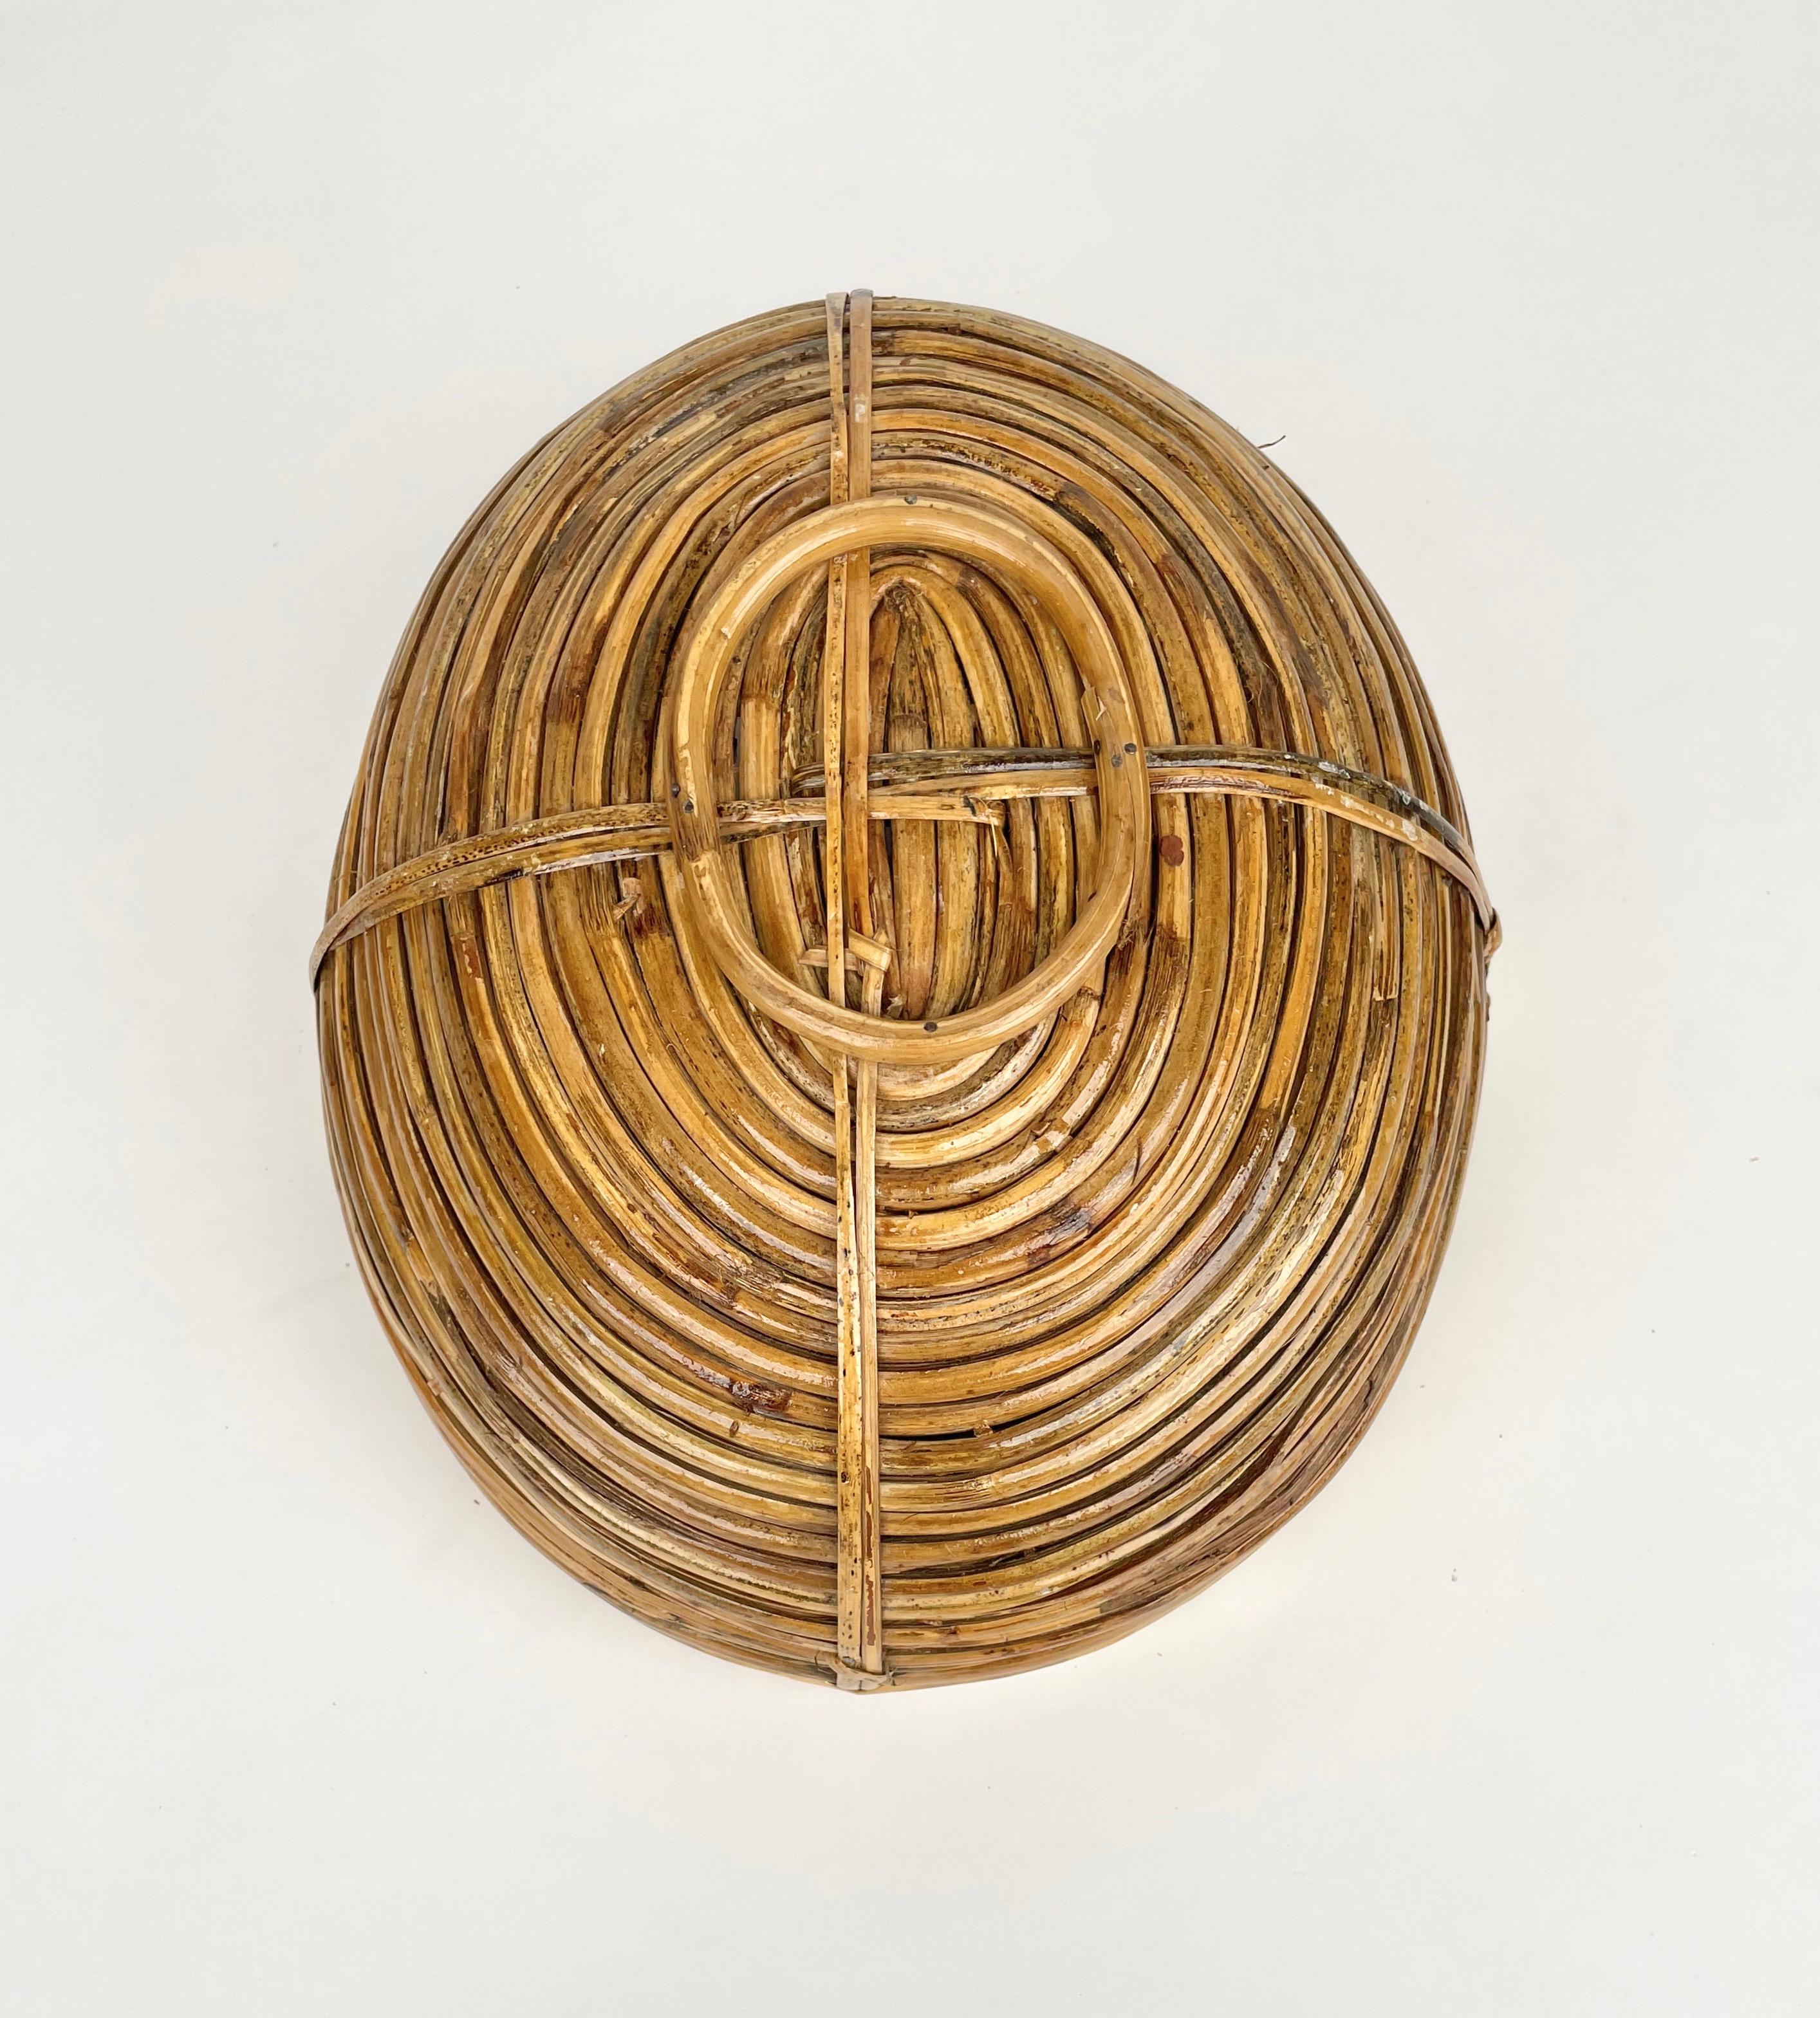 Bamboo and Brass Basket Bowl with Handle, Italy, 1970s For Sale 6